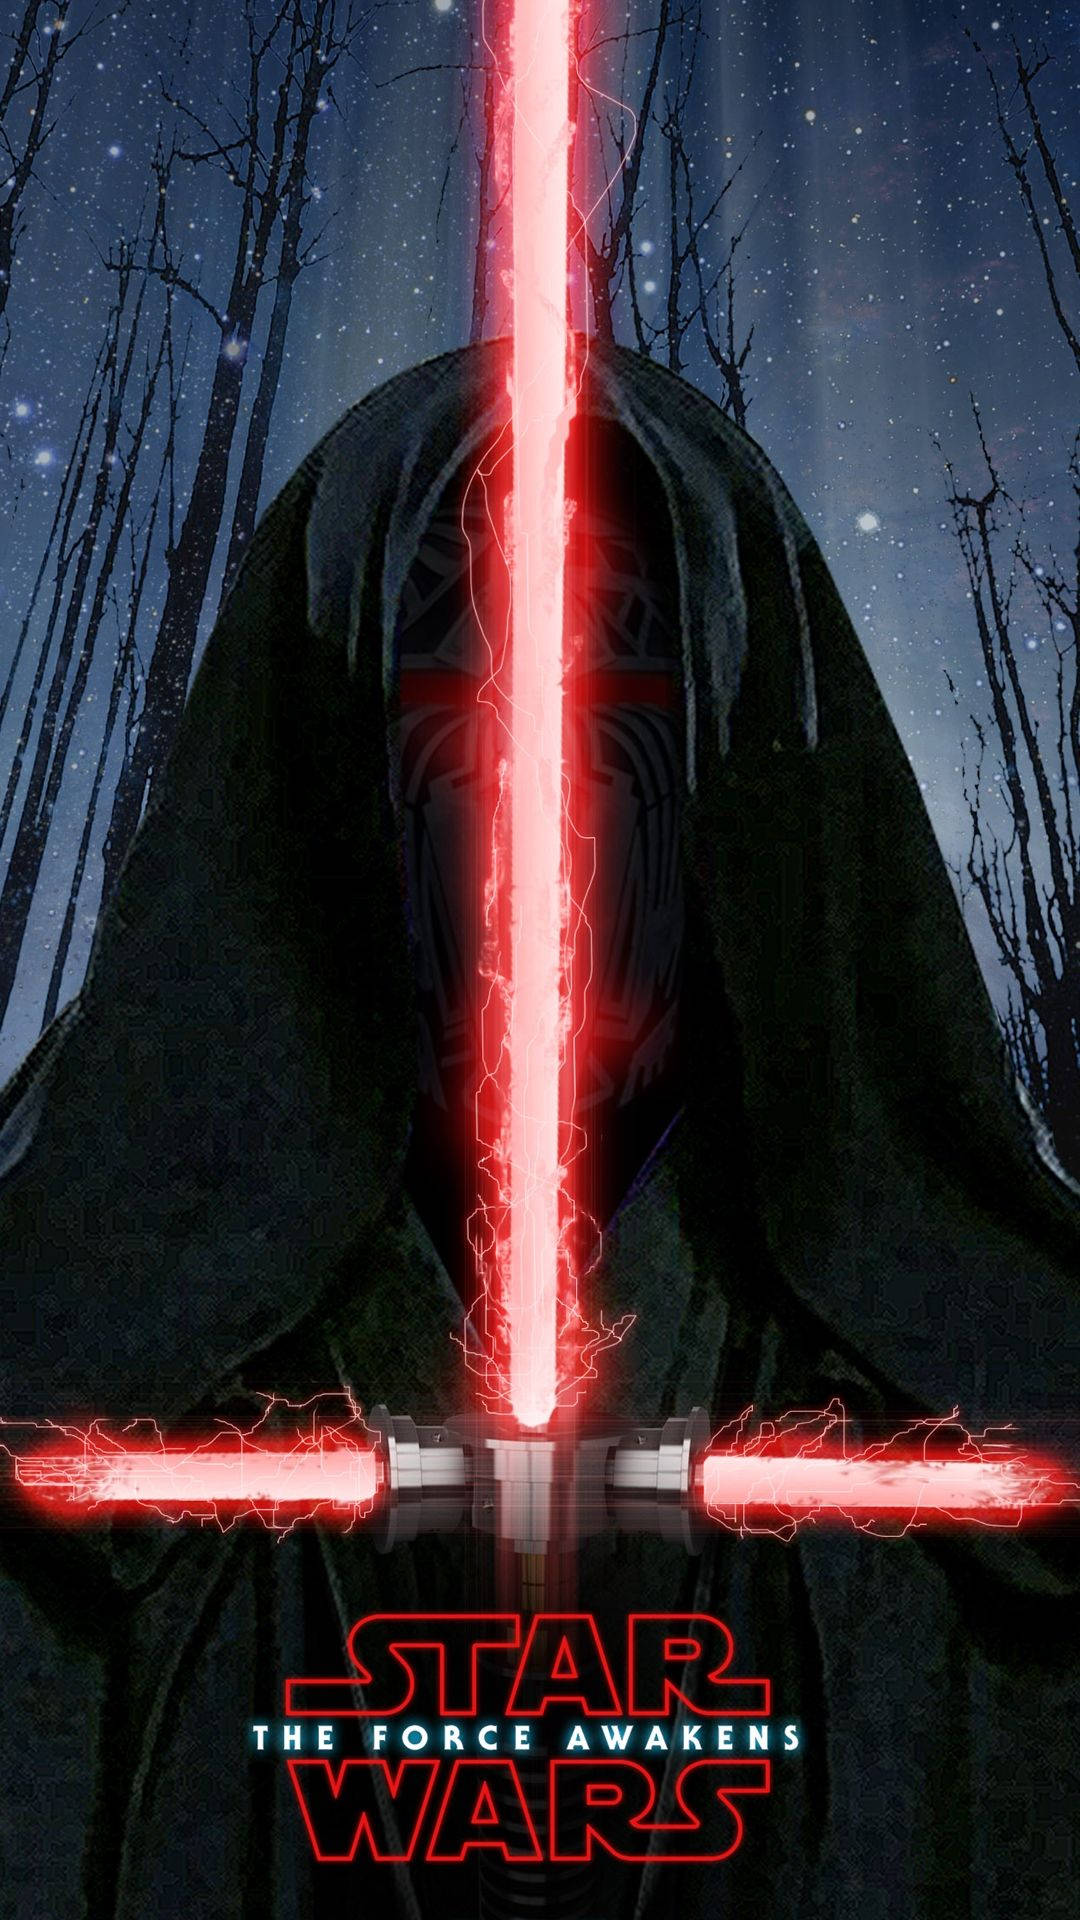 Kylo Ren From Star Wars Cell Phone Background